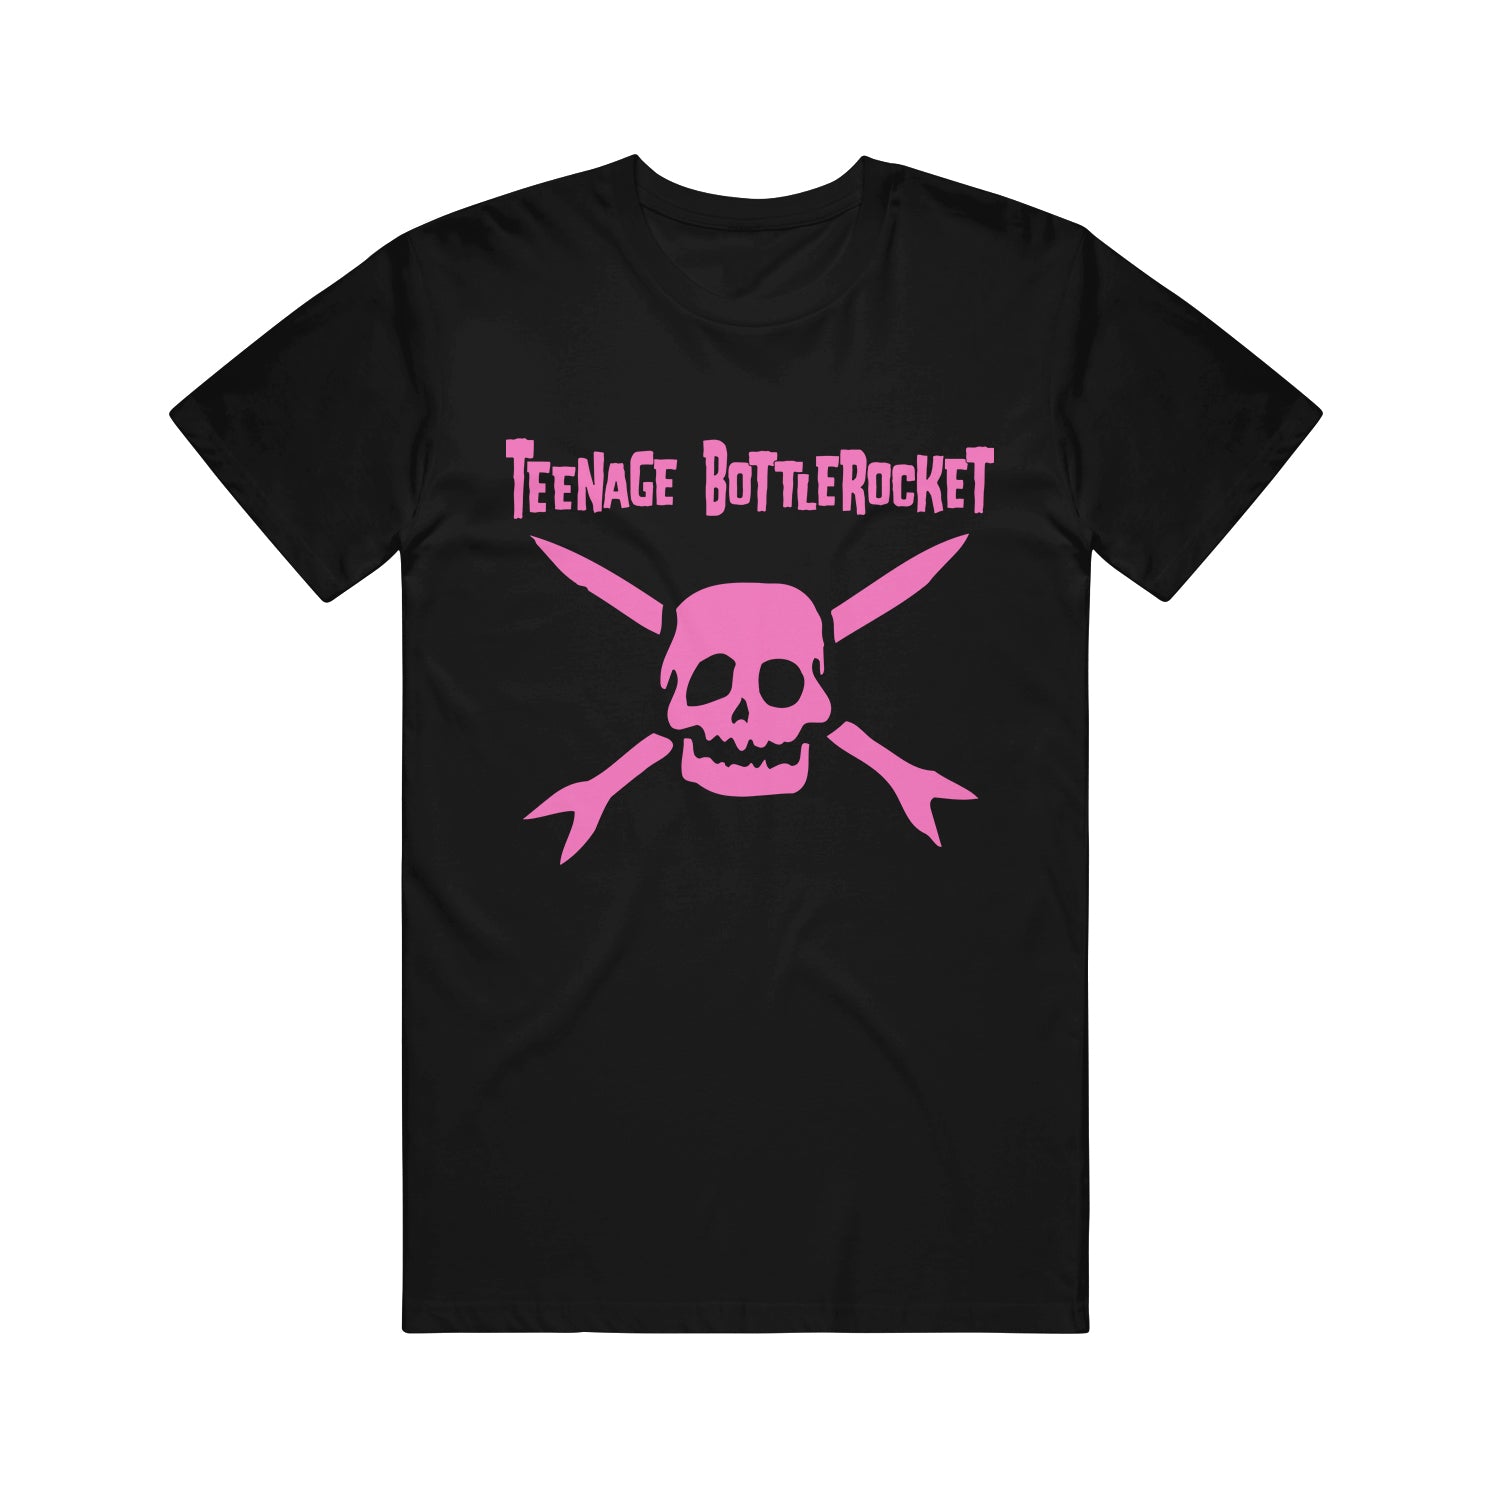 Image of a black tshirt against a white background. The center of the tshirt says teenage bottlerocket in pink text across the chest. Below that is a pink graphic of the teenage bottlerocket logo- a skull head with cross arrows.